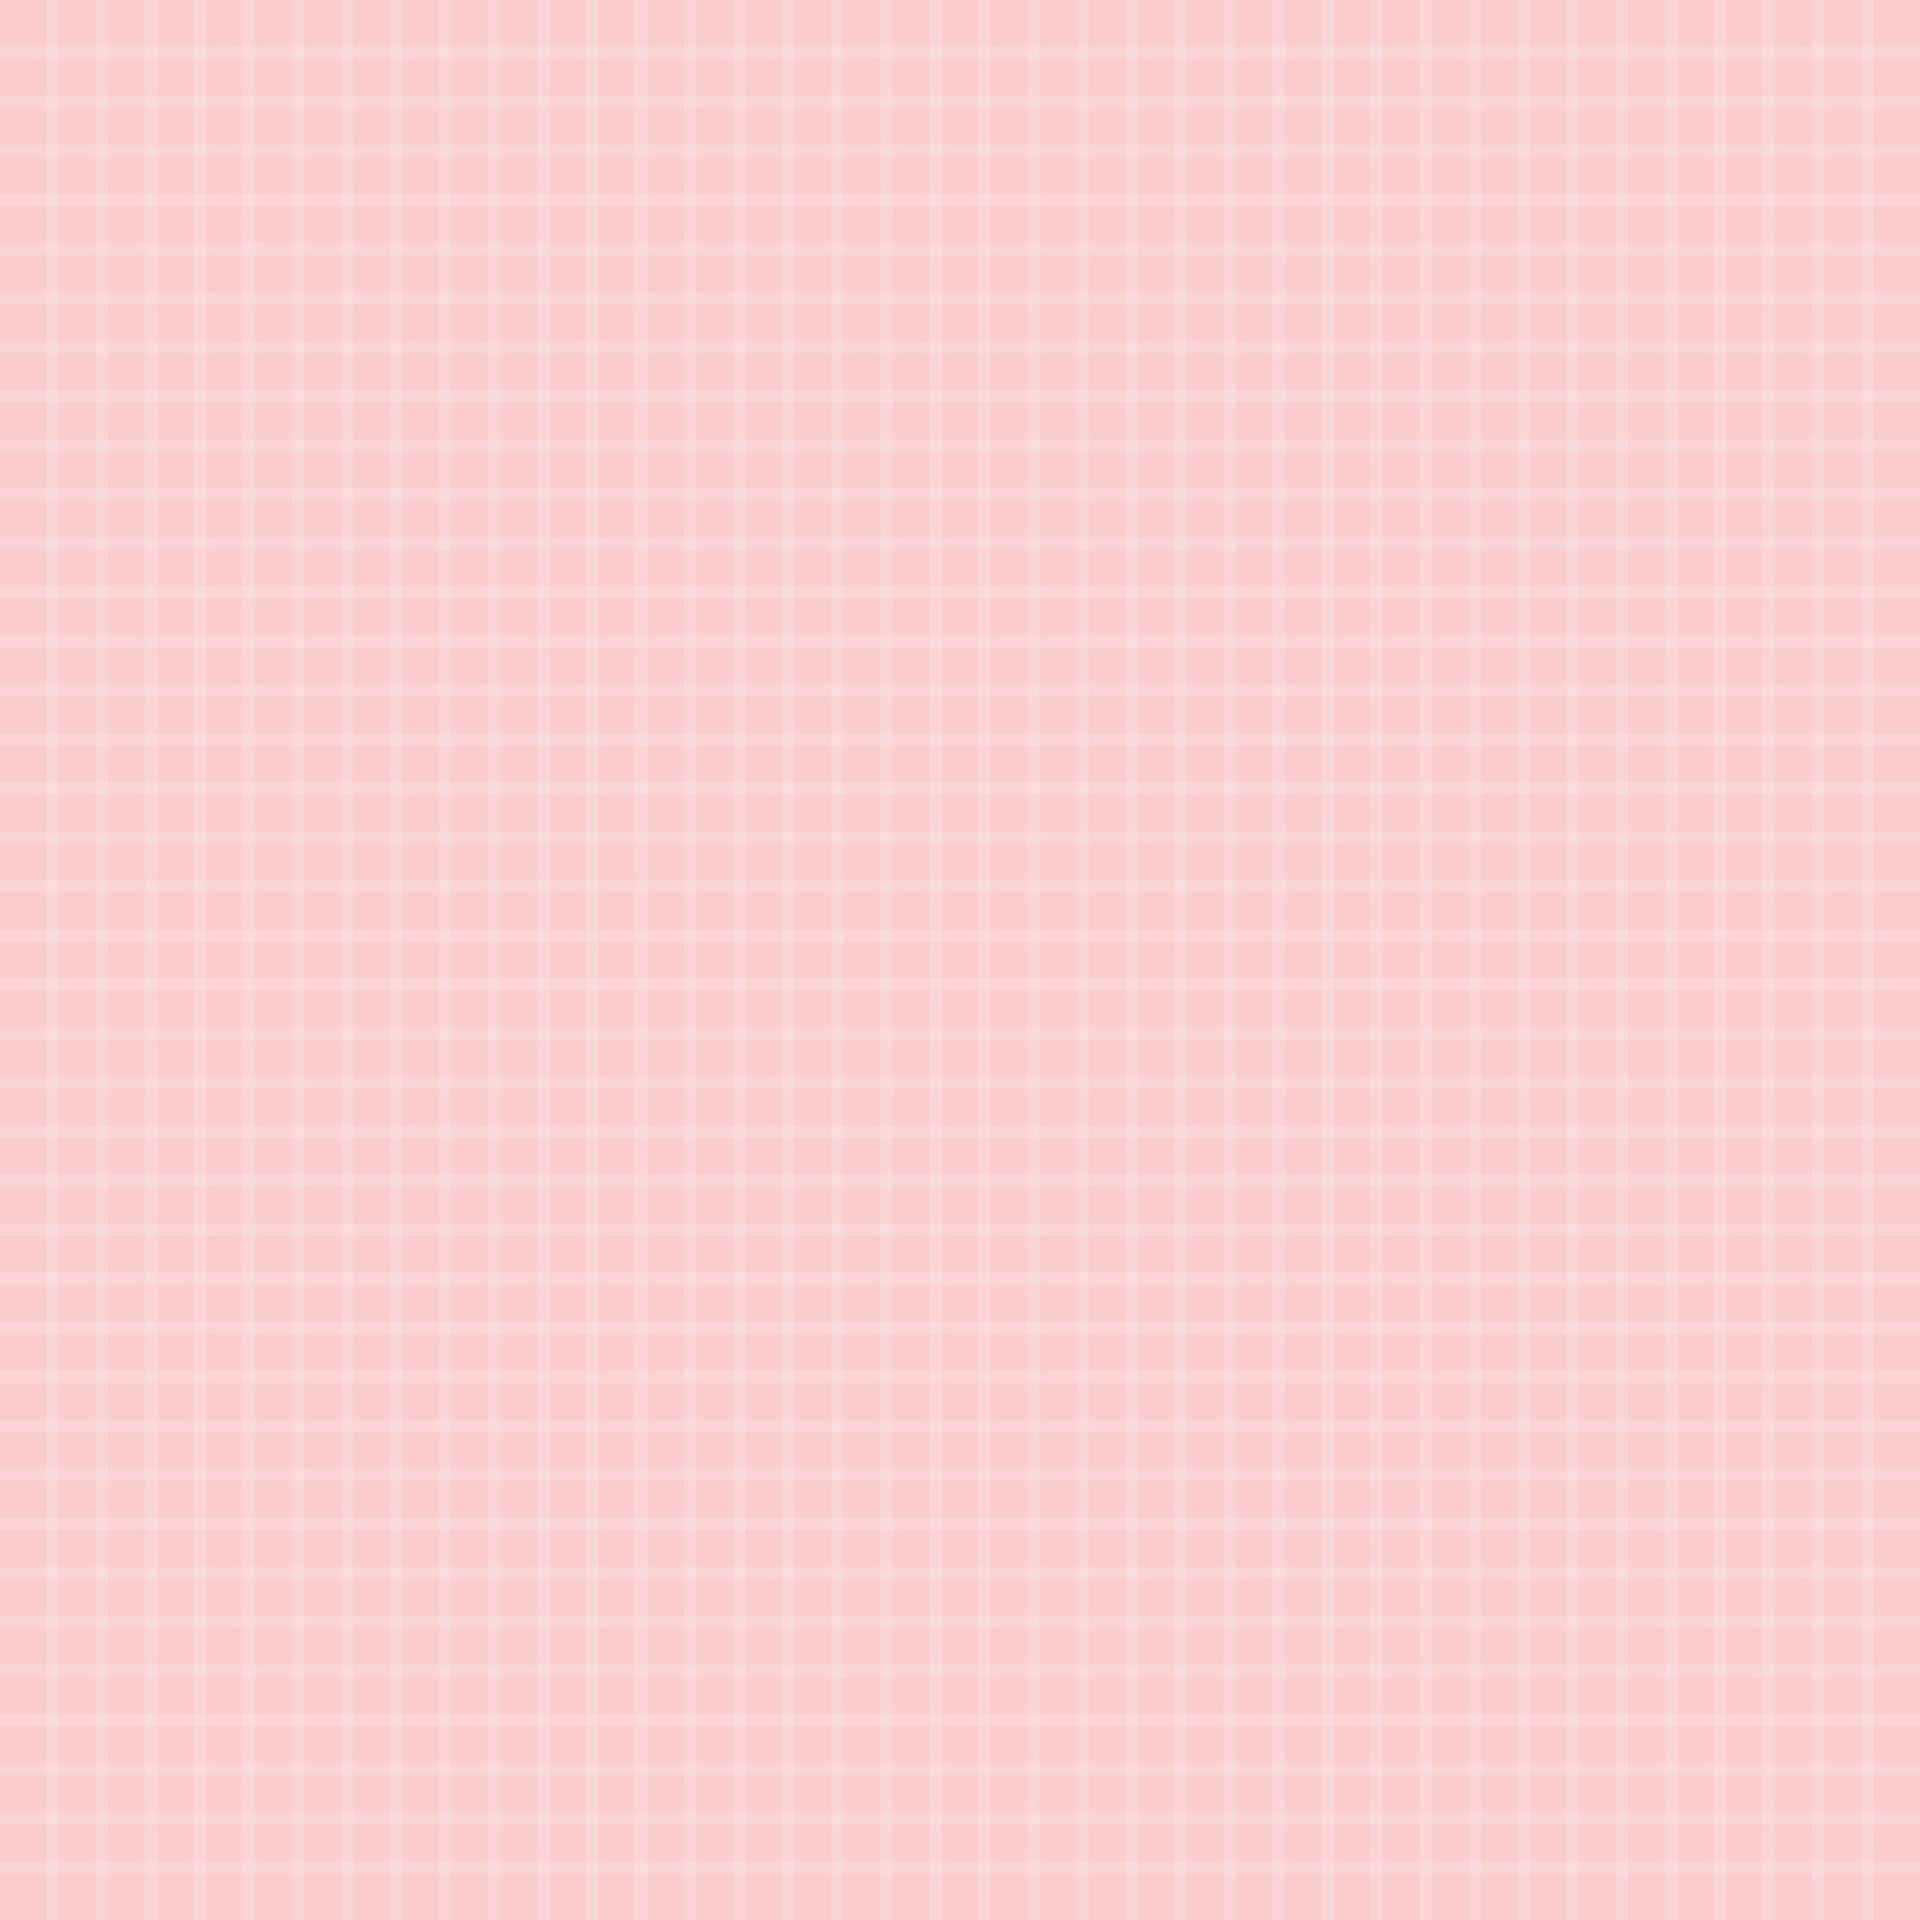 Vector hot pink aesthetic grid pattern background